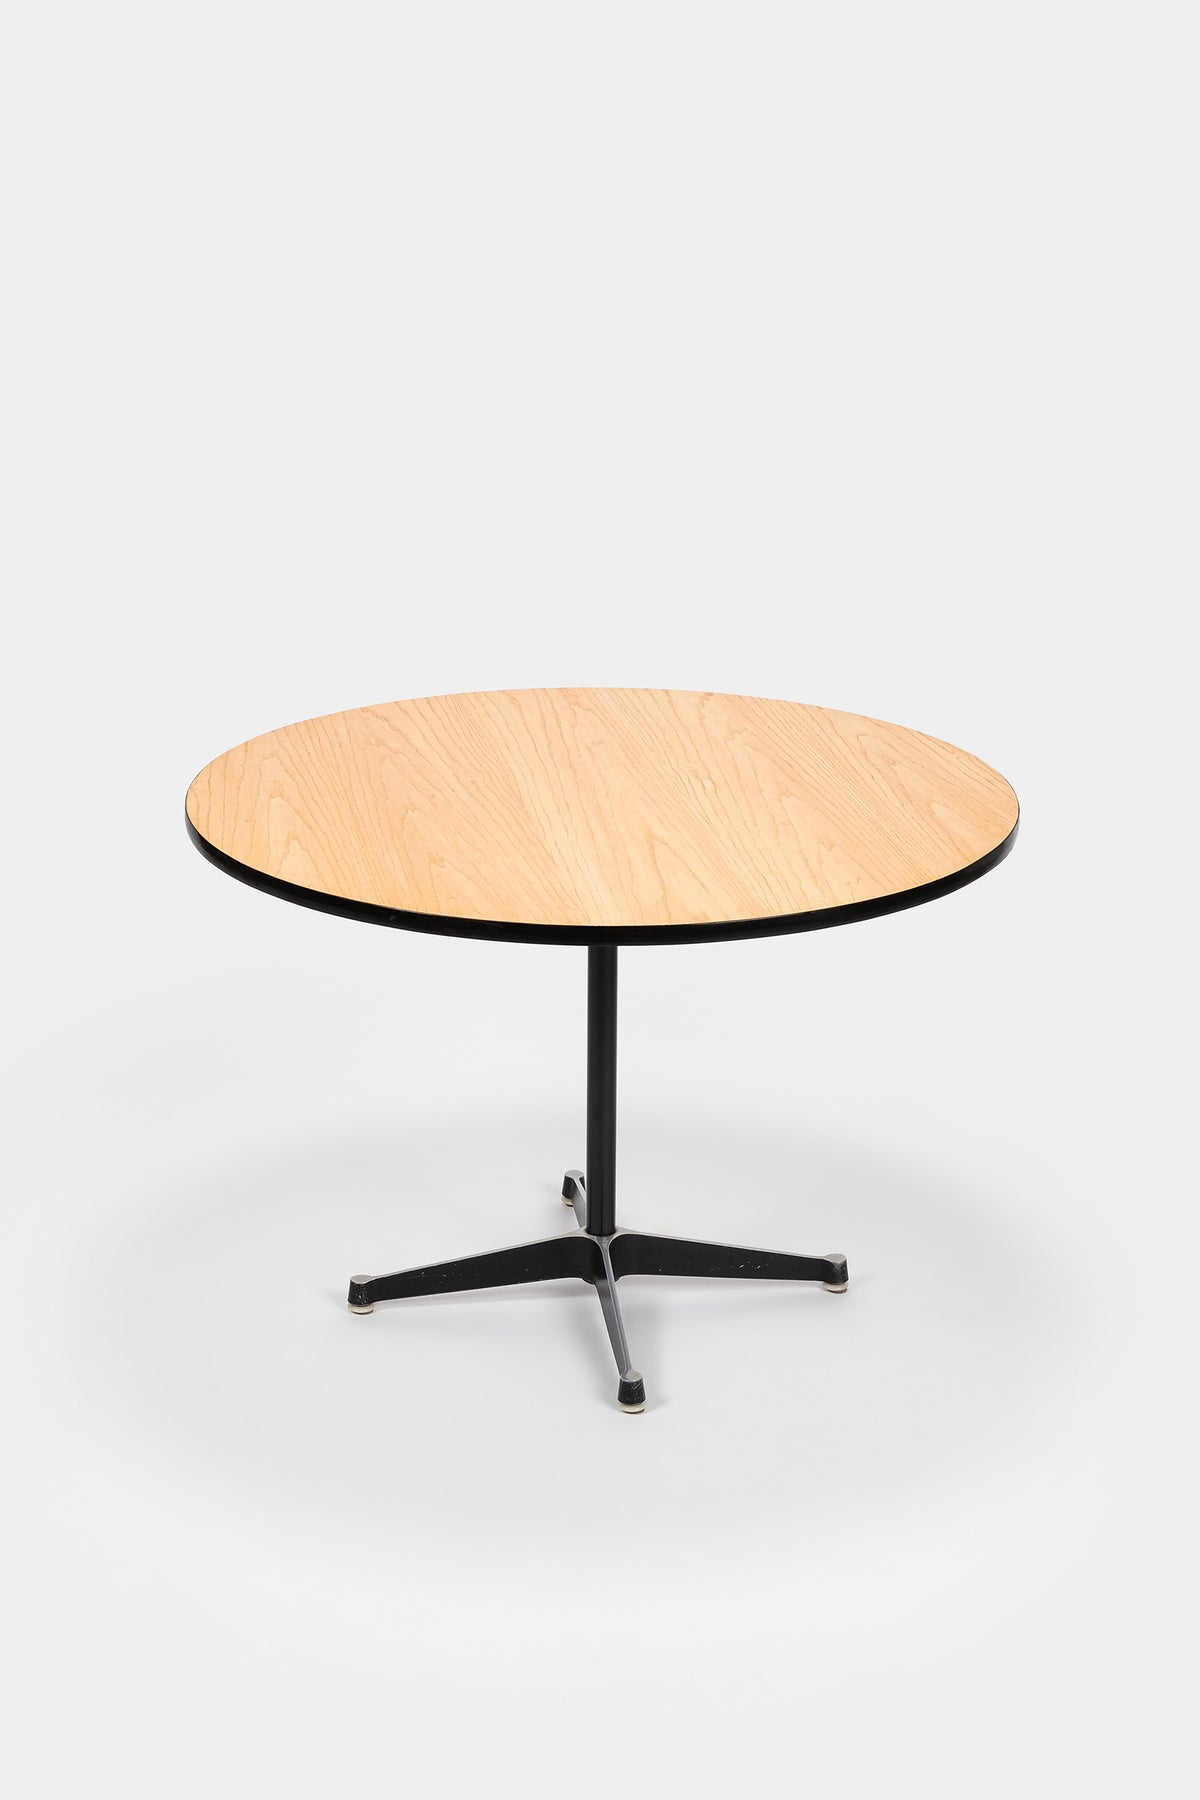 Charles and Ray Eames, Table "Contract", Ash, Vitra, 70s